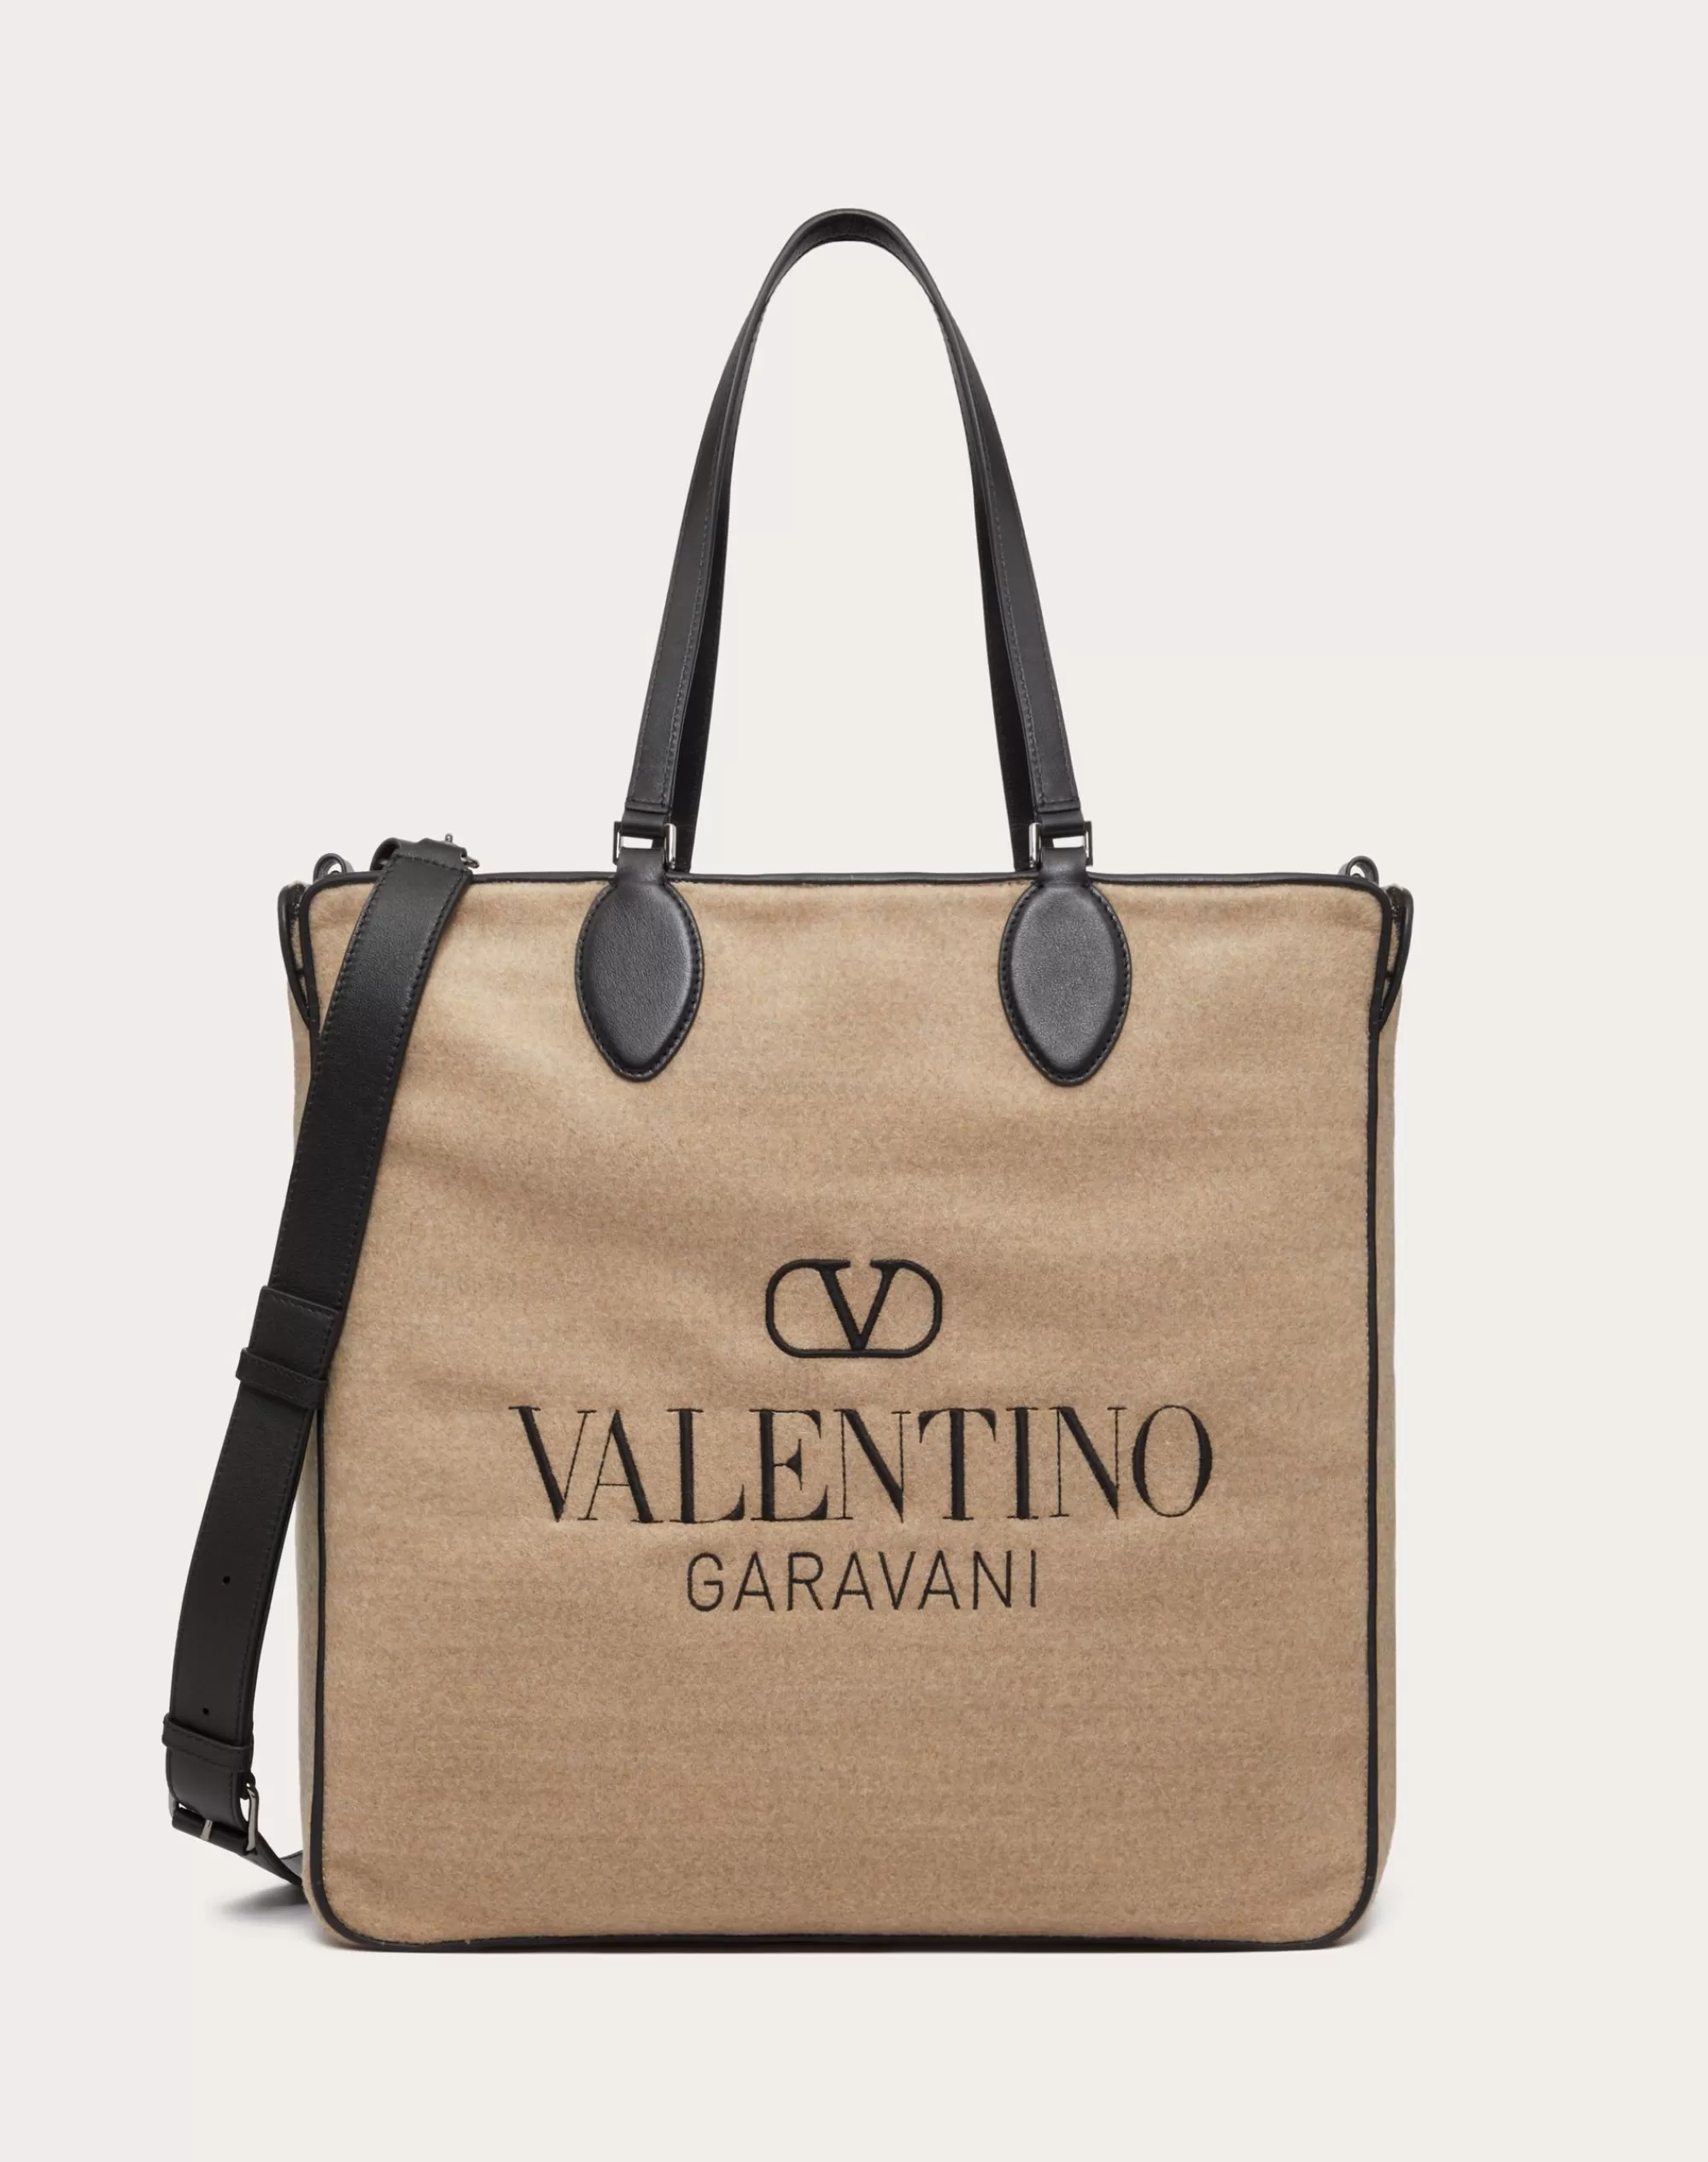 Valentino TOILE ICONOGRAPHE SHOPPING BAG IN WOOL WITH LEATHER DETAILS Beige/black Cheap